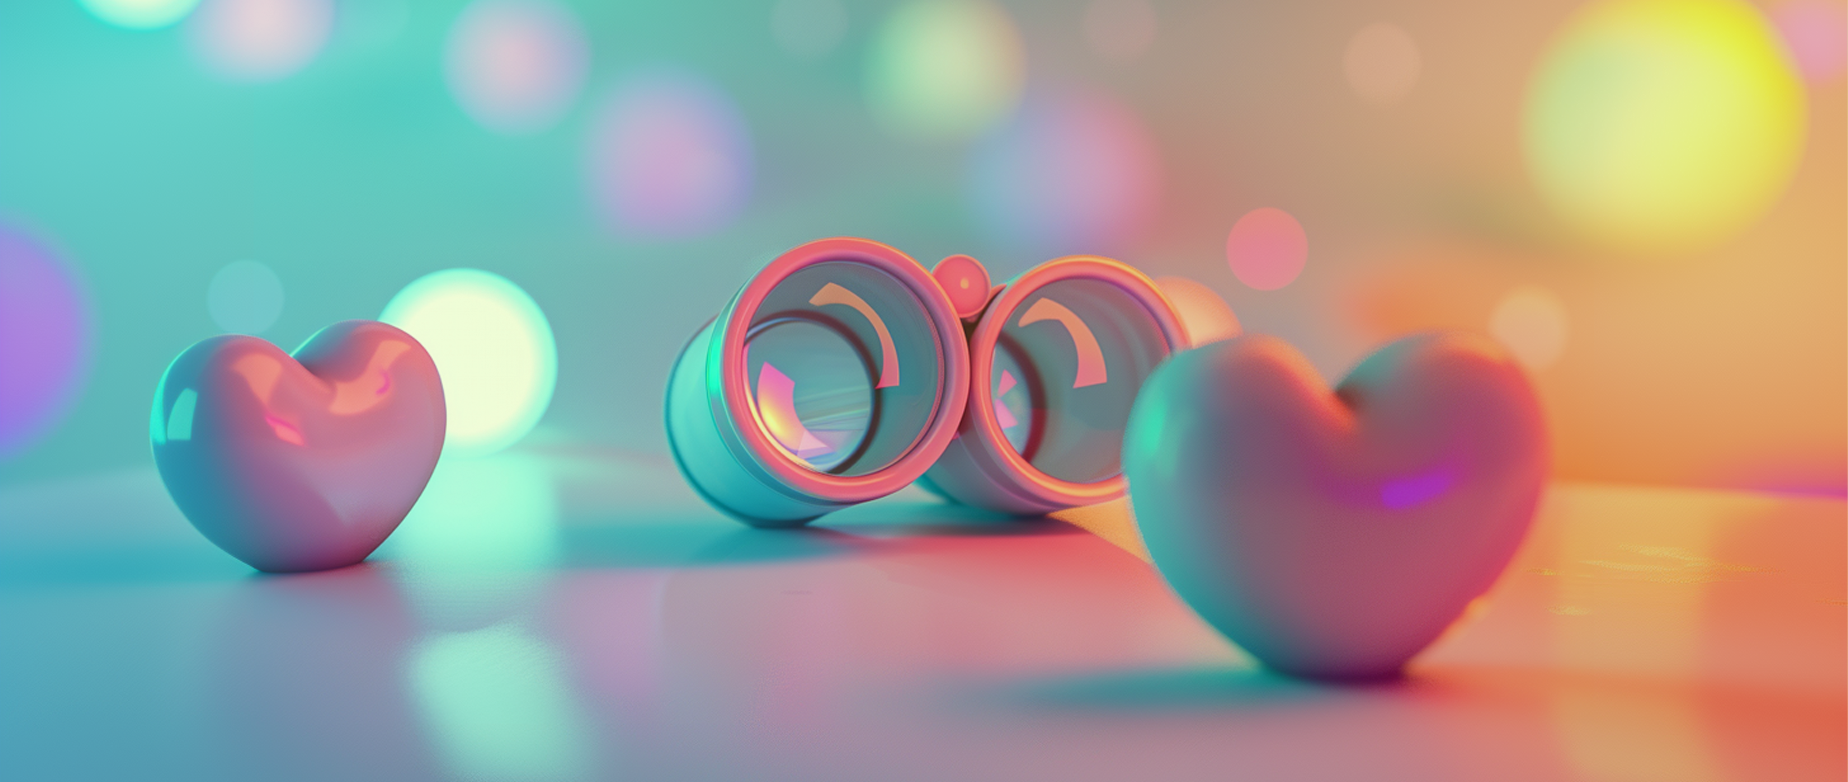 Hearts and binoculars on a colorful display with lights.